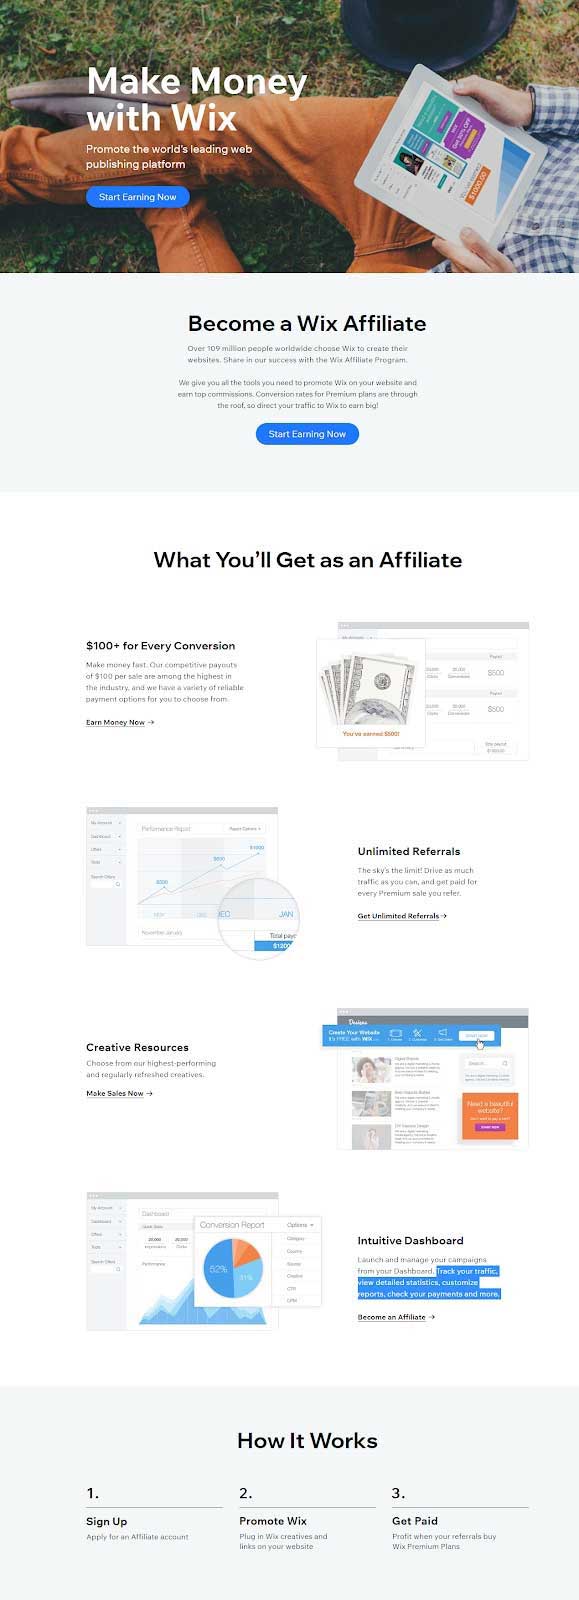 15 Awesome Affiliate Marketing Examples + Why They Work 5